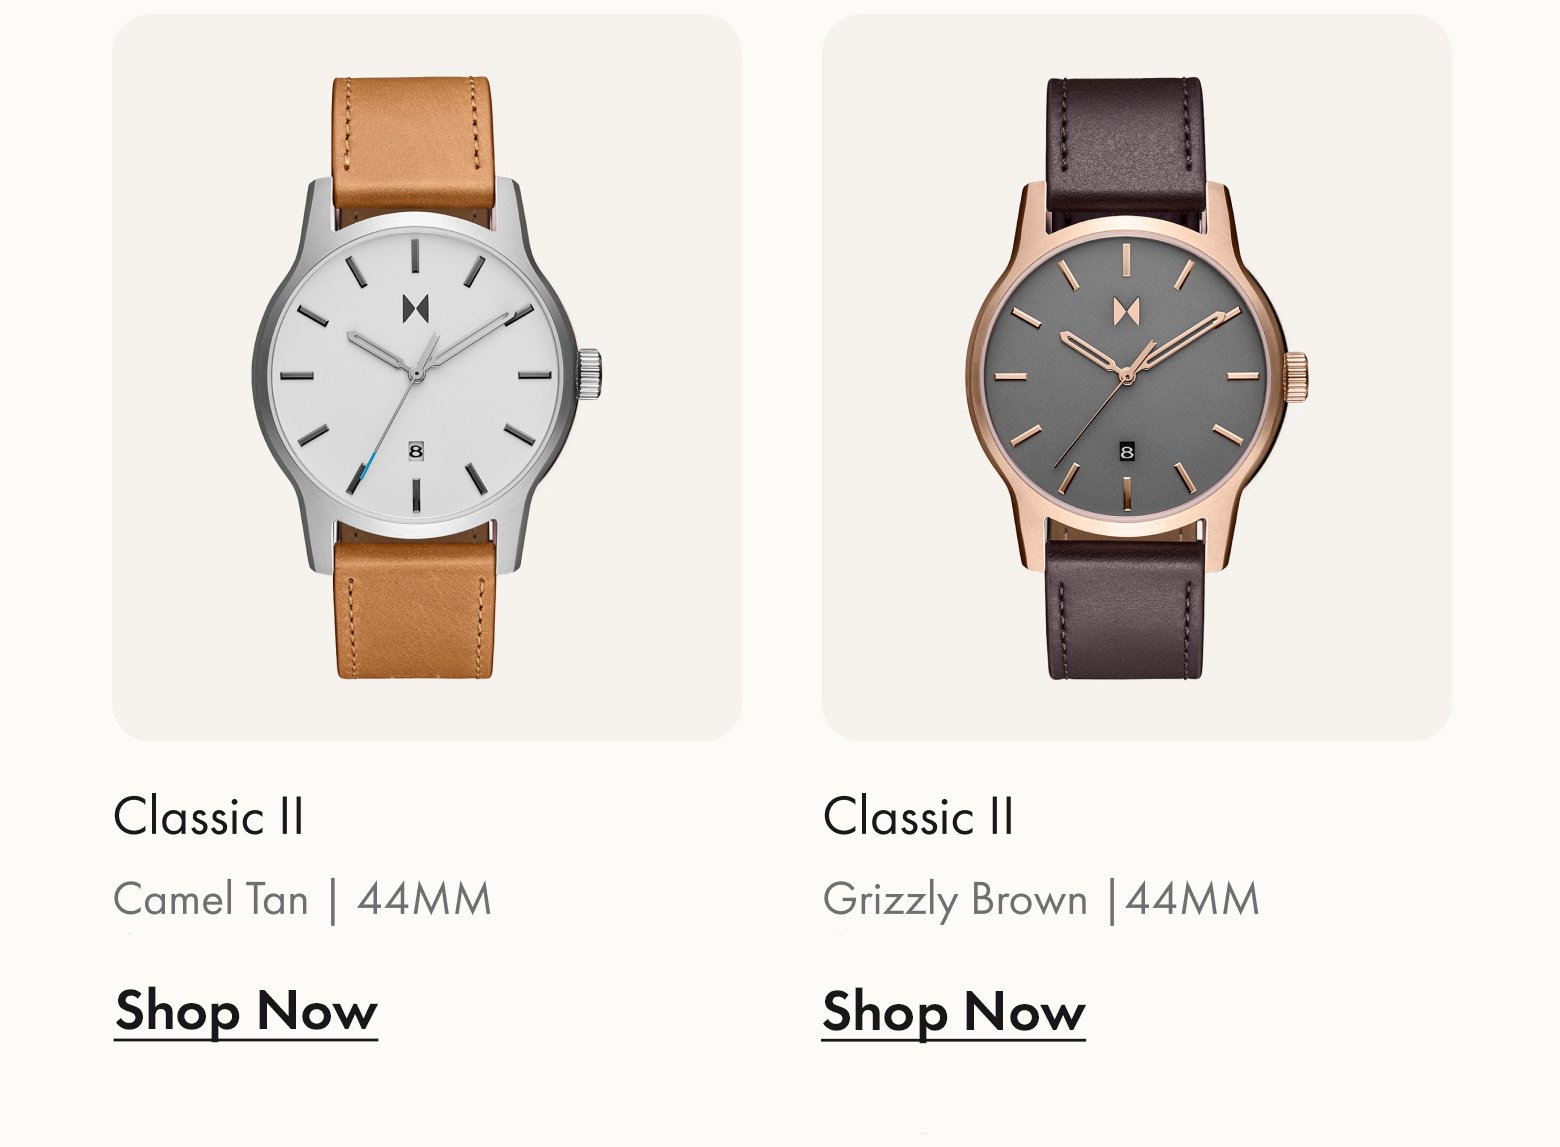 MVMT Classic II watches in Camel Tan and Grizzly Brown